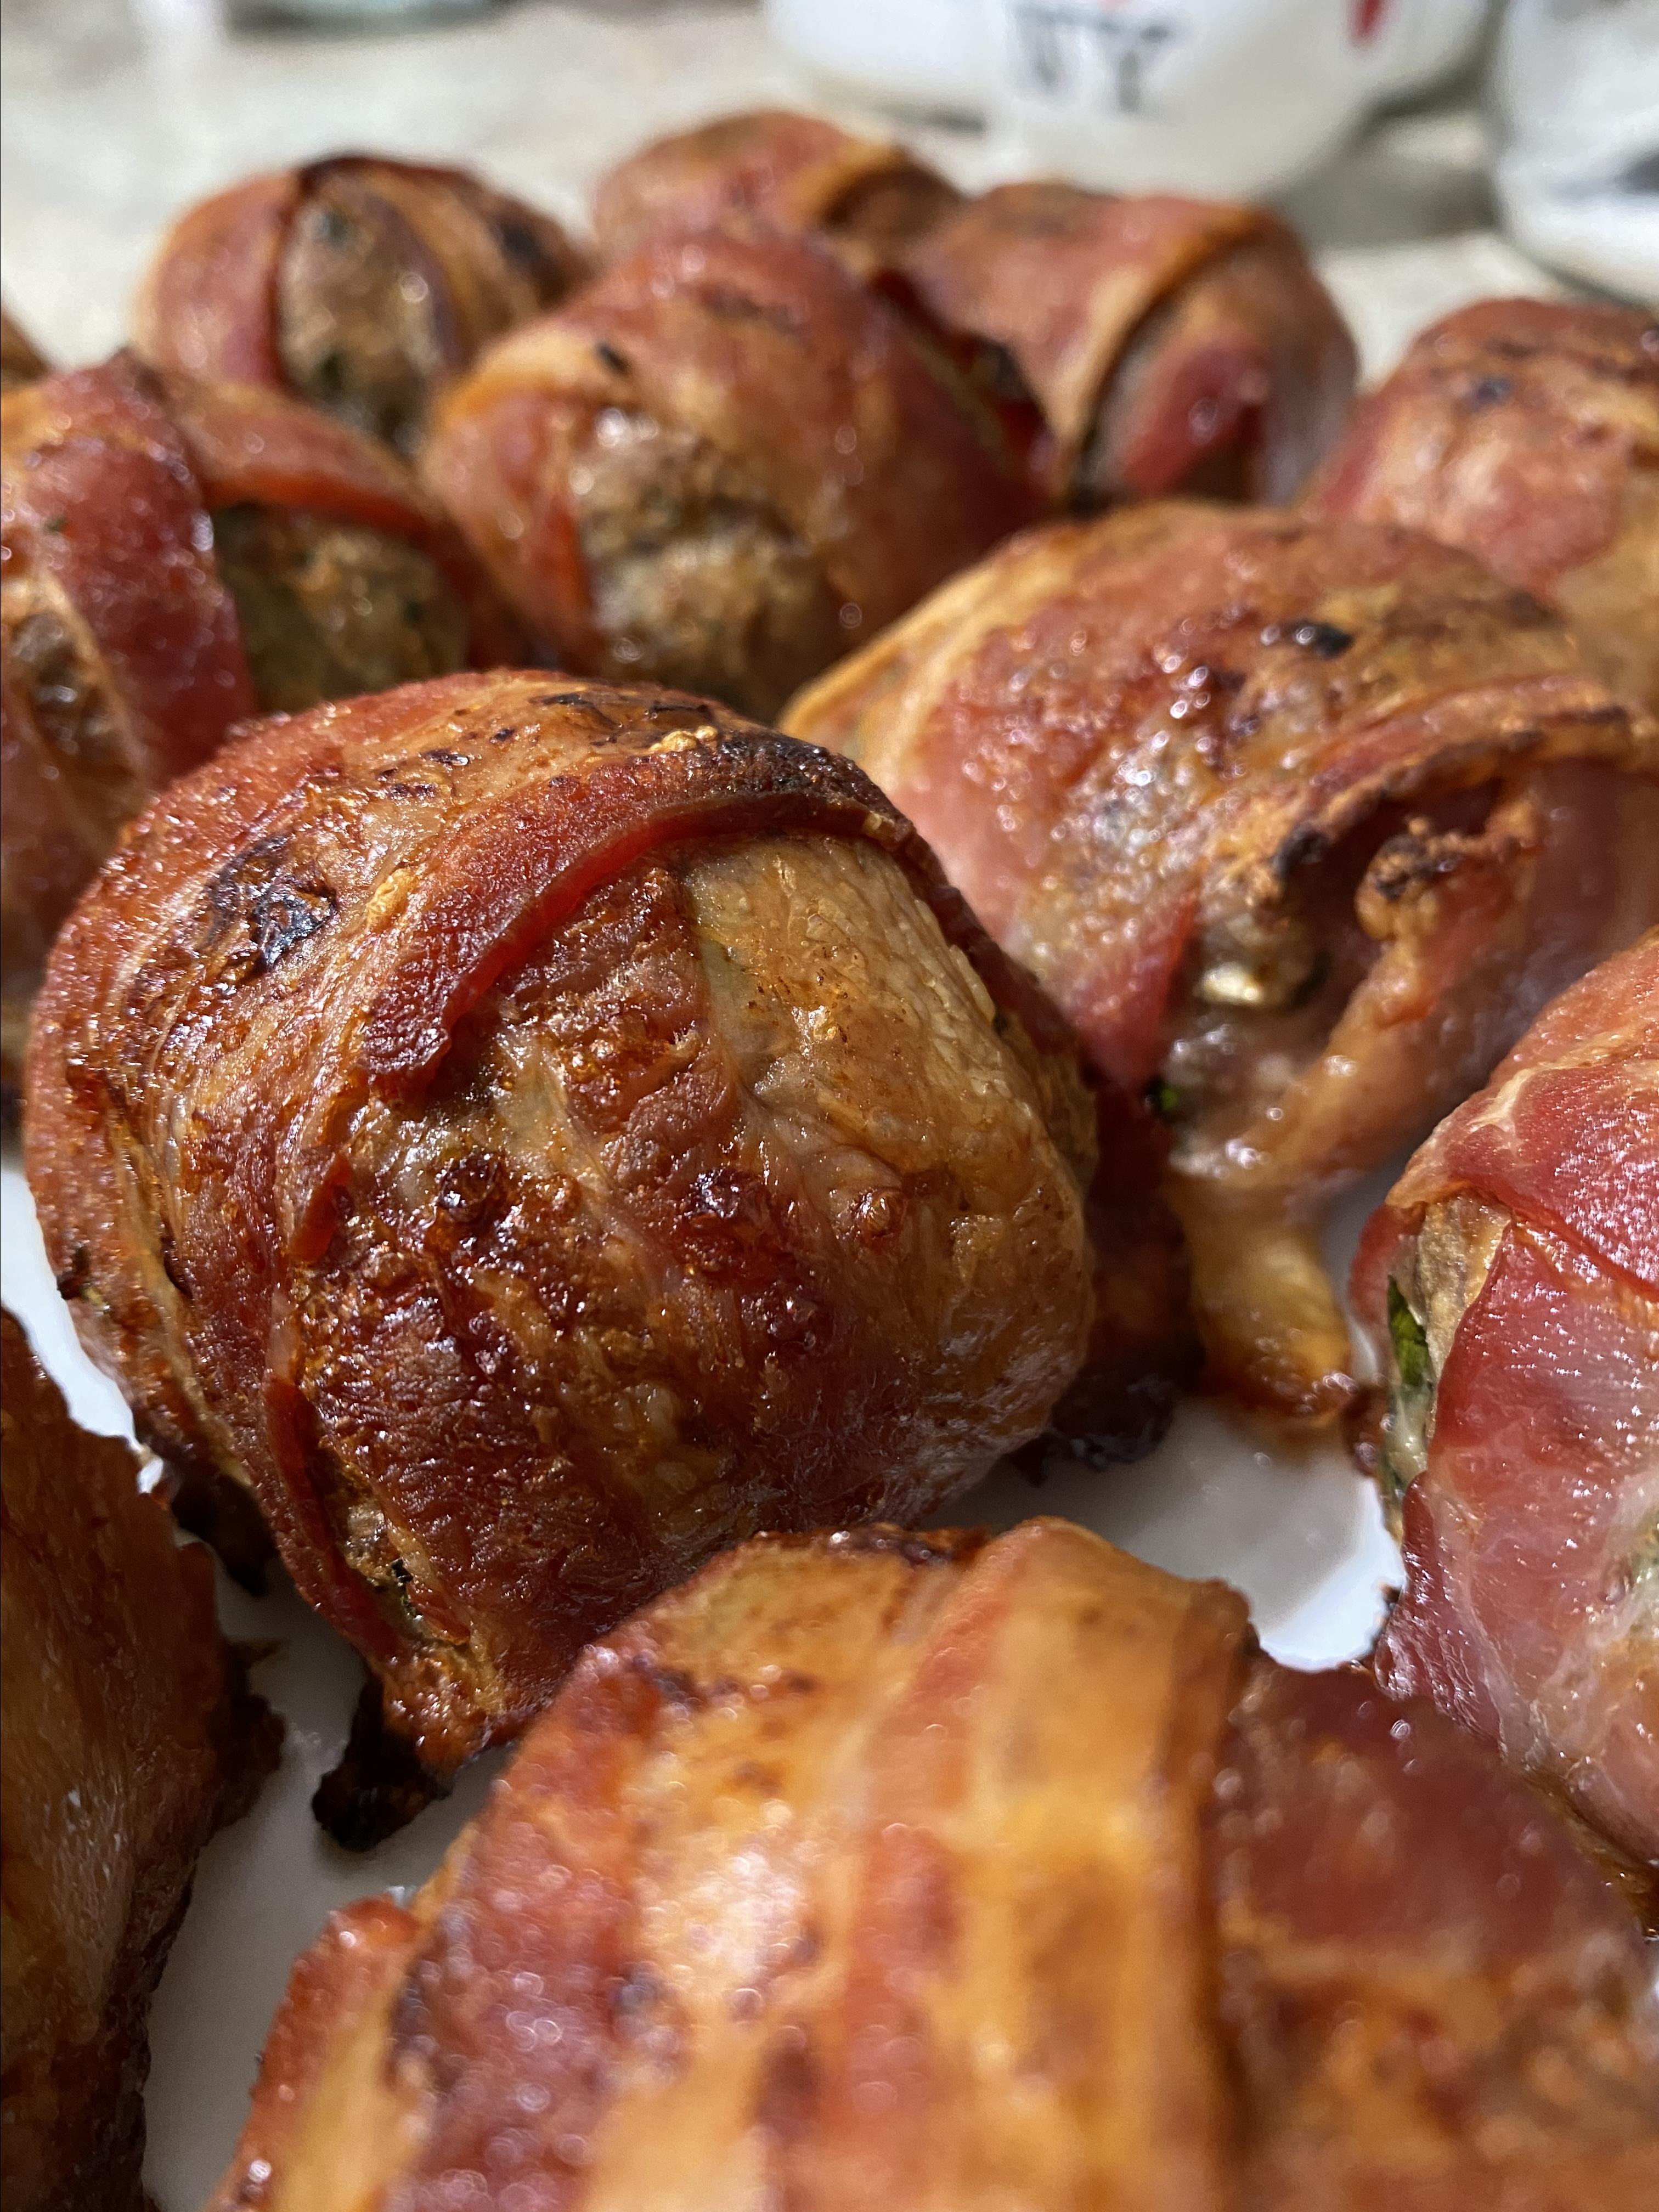 Giant Bacon-Wrapped Meatballs rose